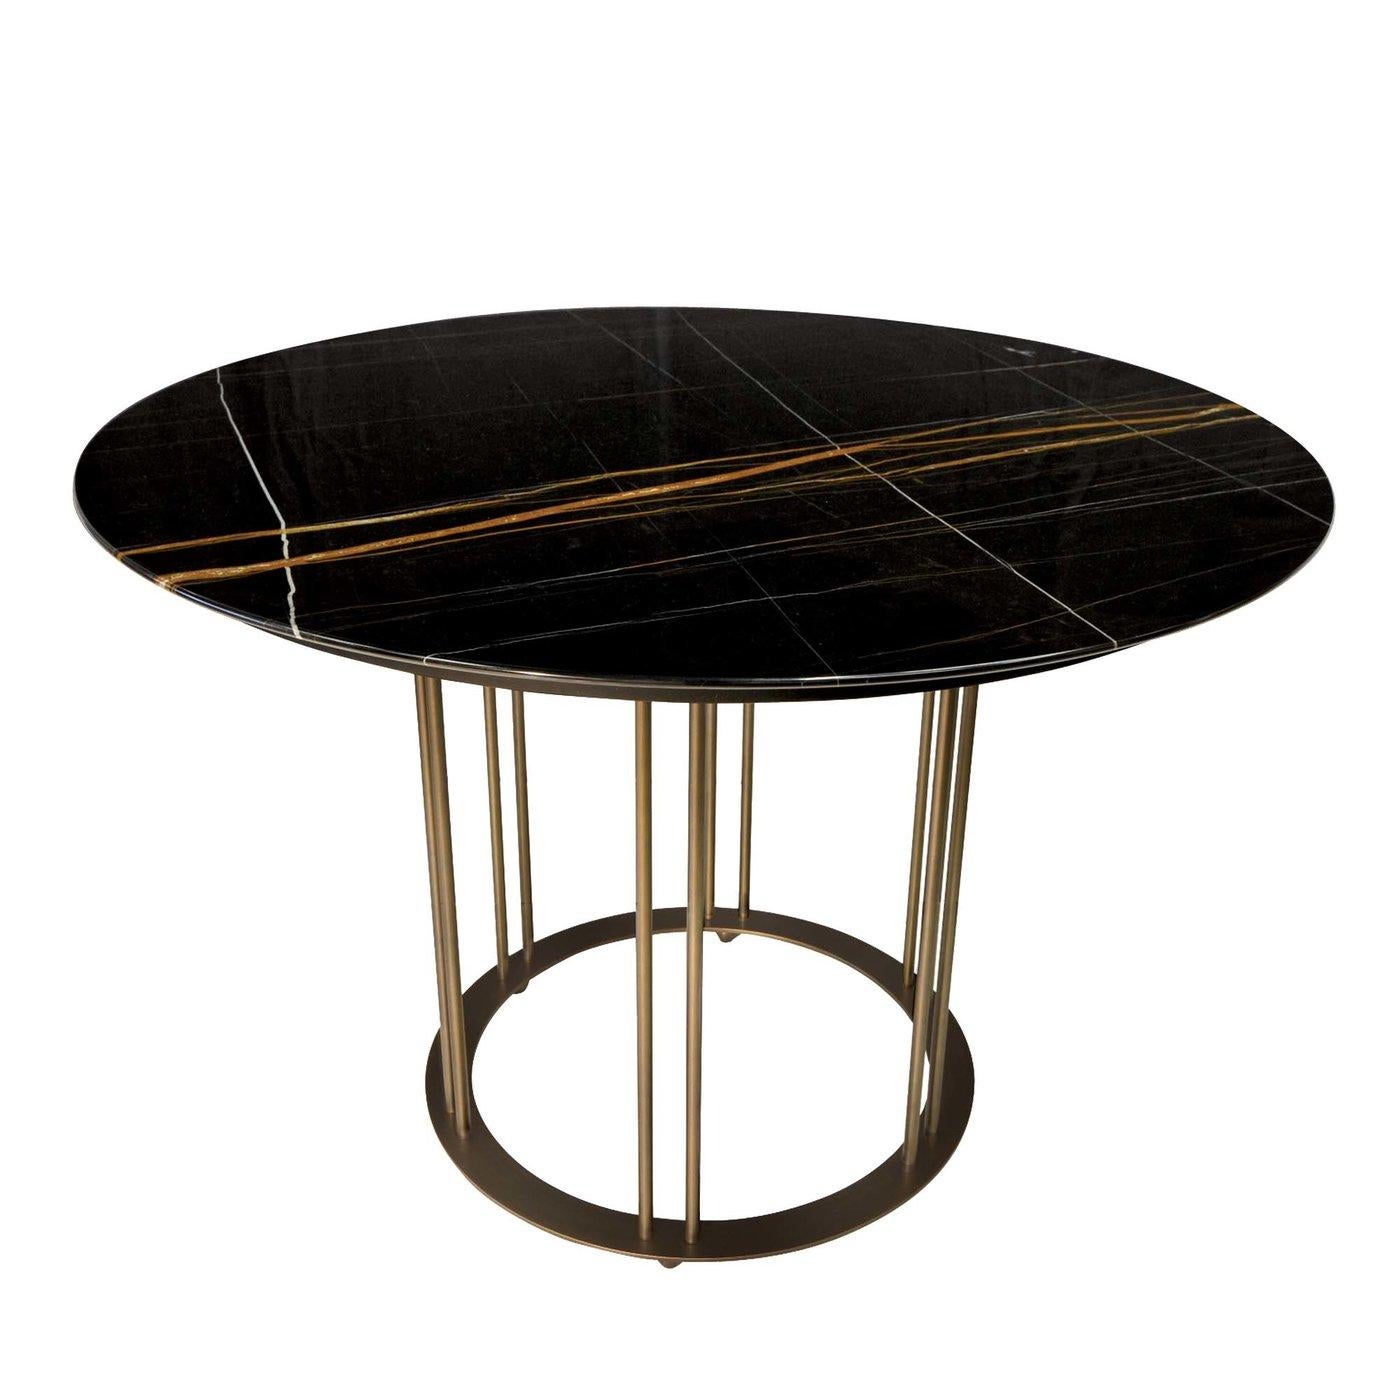 A pleasure to sit around during evening dinners or special occasions, this spectacular table captures a modern, minimalist aesthetic. The top is fashioned of Nero Guinea marble, prized for its deep black color and red, yellow, and white veining. Six